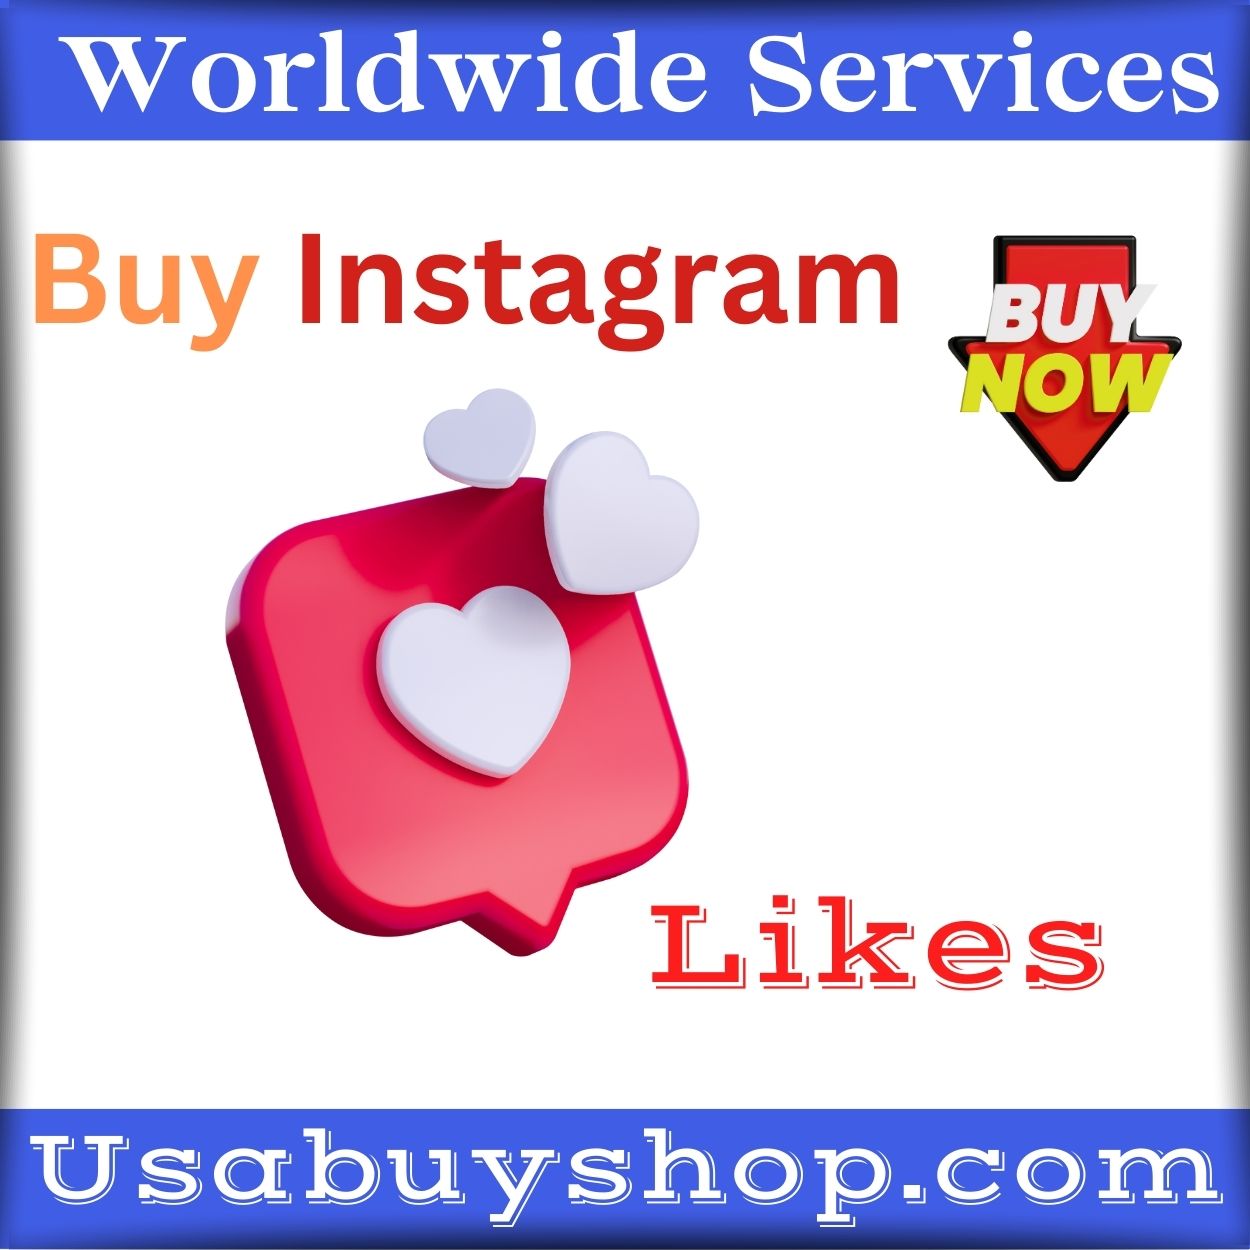 Buy Instagram Likes -100% Real & Instant Social Credibility